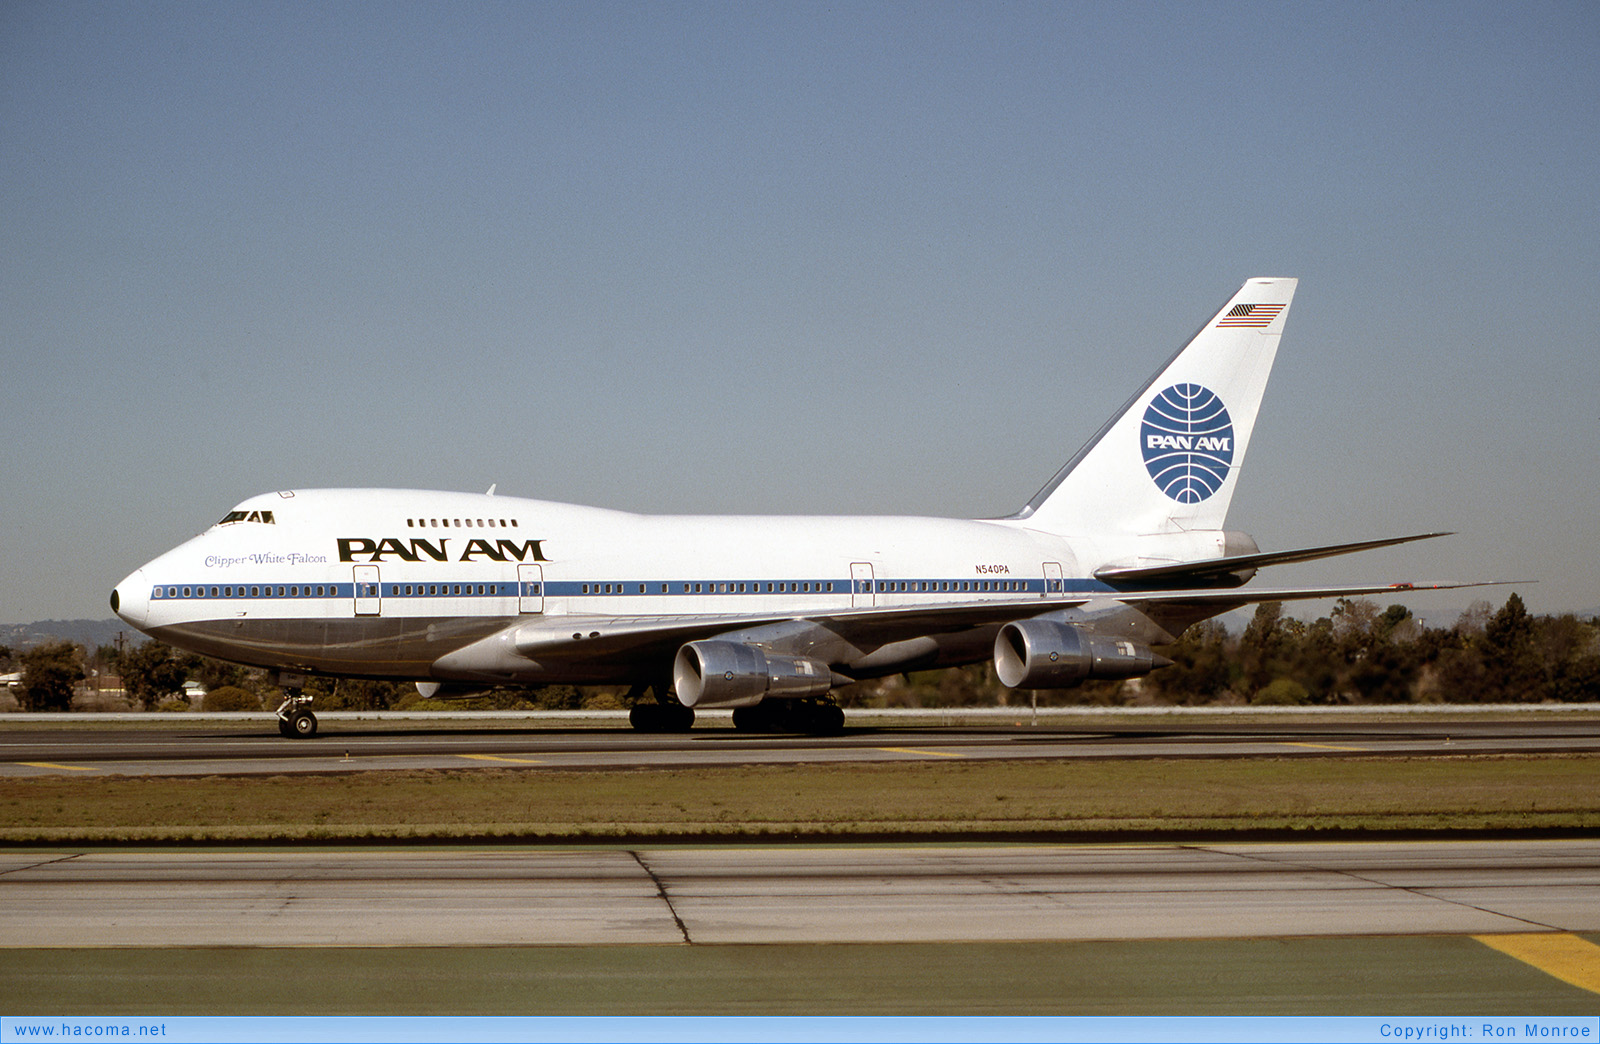 Foto von N540PA - Pan Am Clipper White Falcon / Flying Arrow / Star of the Union / China Clipper - Los Angeles International Airport - 03.1980